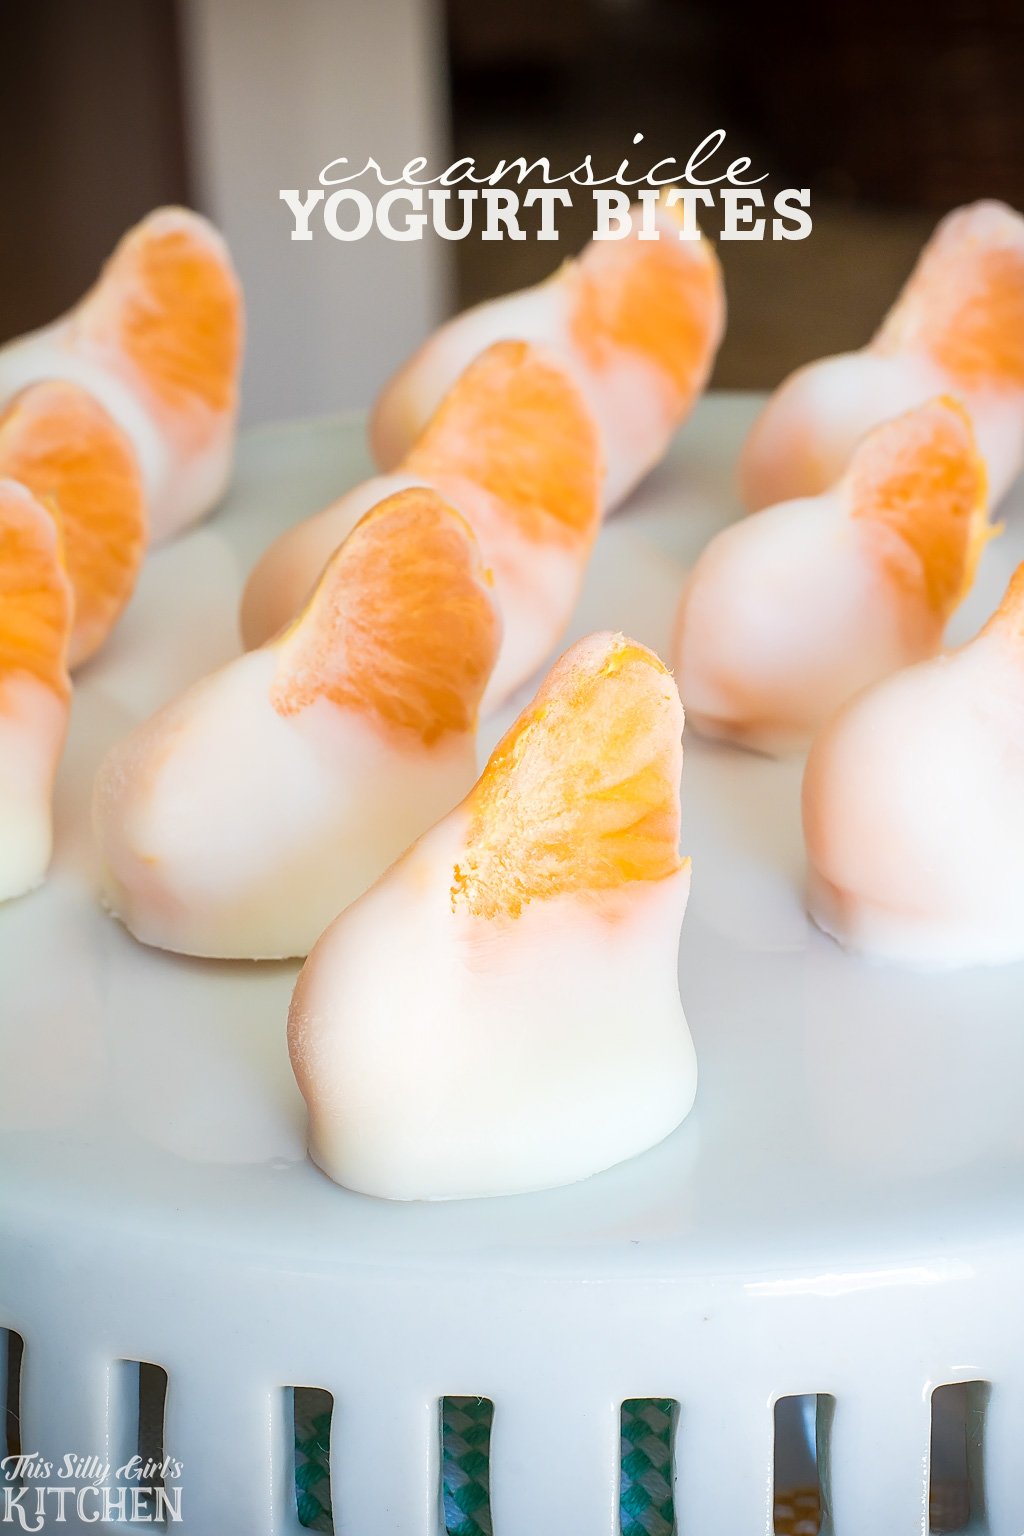 Creamsicle Yogurt Bites, clementines dipped in vanilla yogurt and frozen for a fun, healthy snack! from ThisSillyGirlsKitchen.com AD